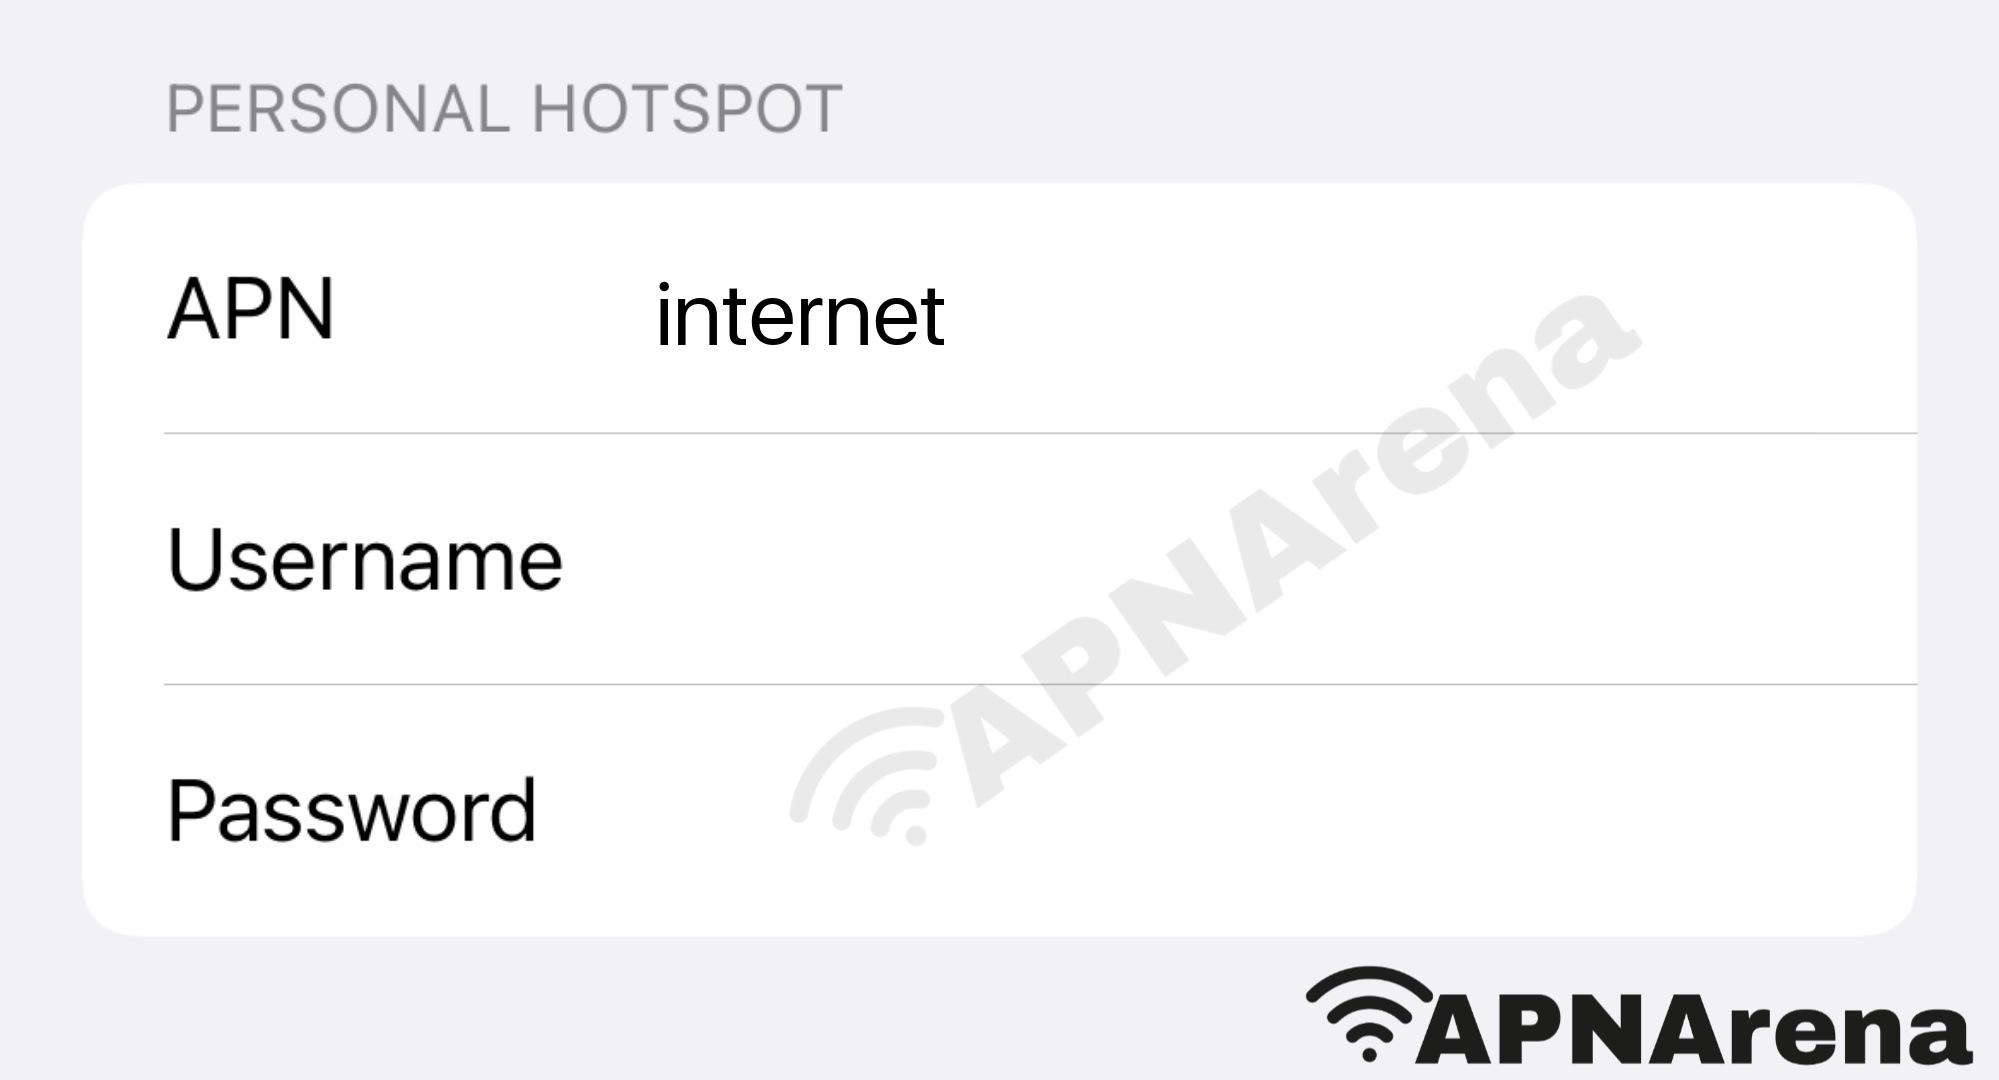 Fonic mobile (ex Lidl) Personal Hotspot Settings for iPhone